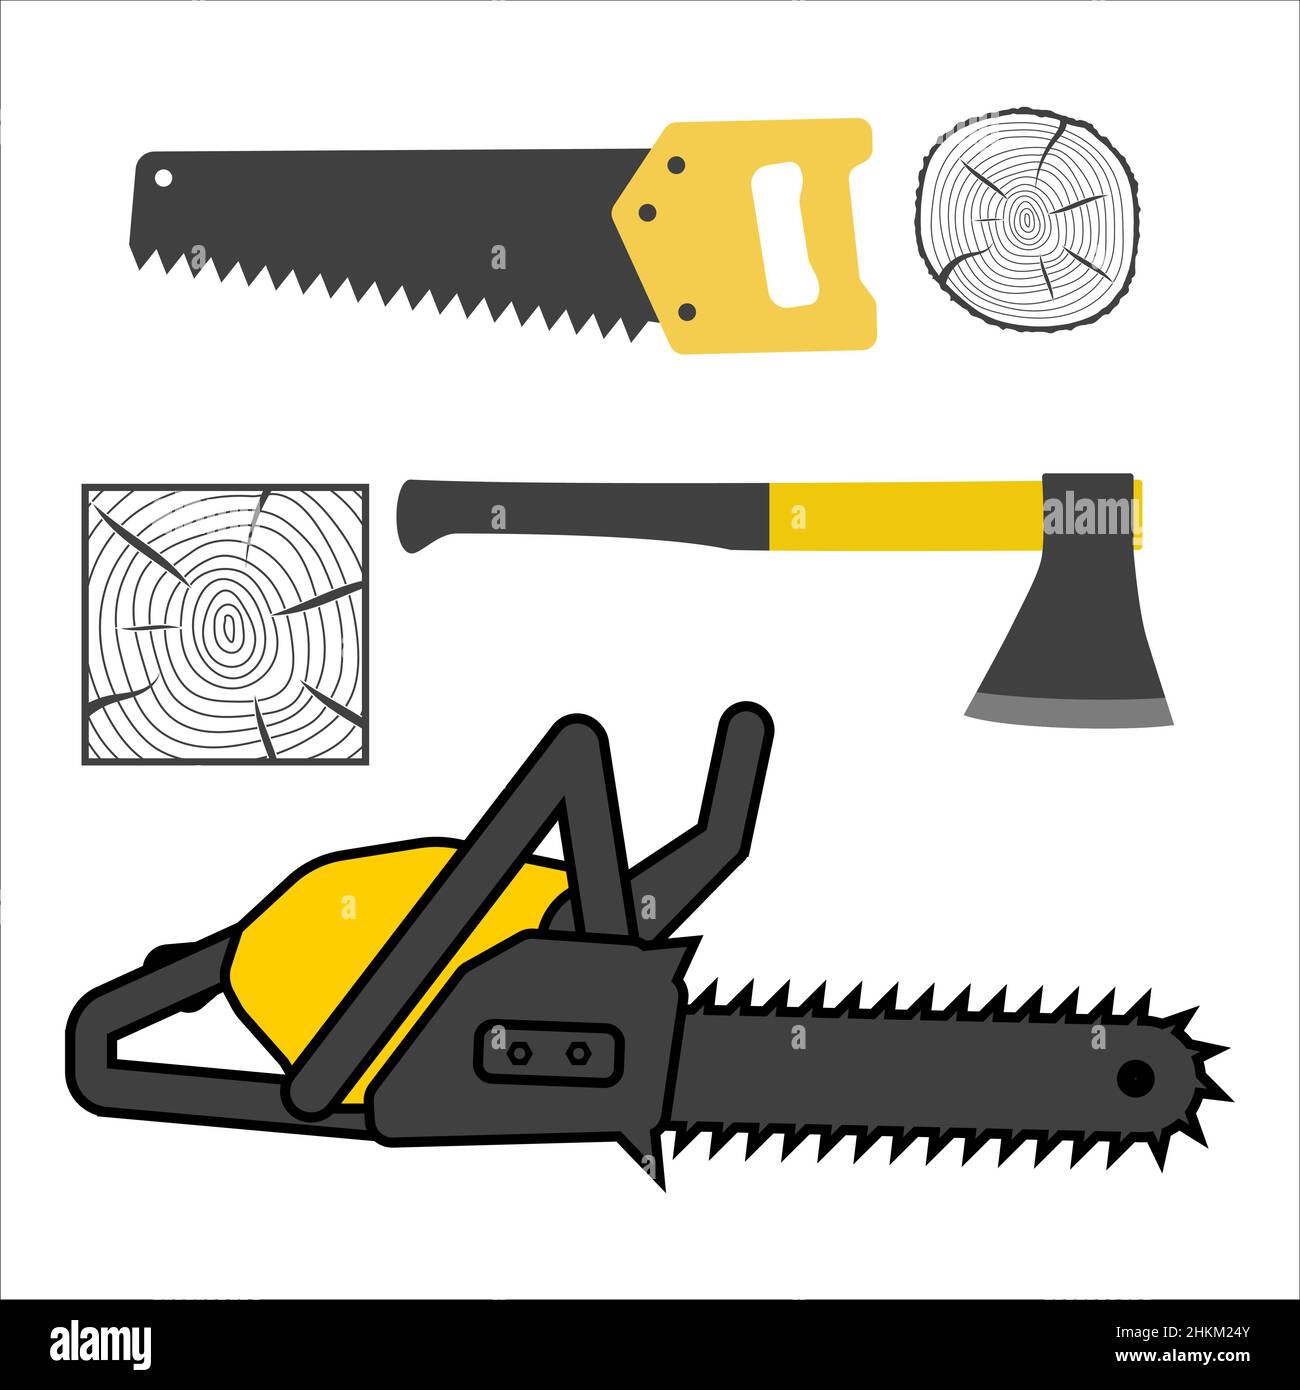 Axeman Toolkit. saw with petrol drive, serrated saw with handle isolated. Realistic vector illustration of hand saws collection. Stock Vector